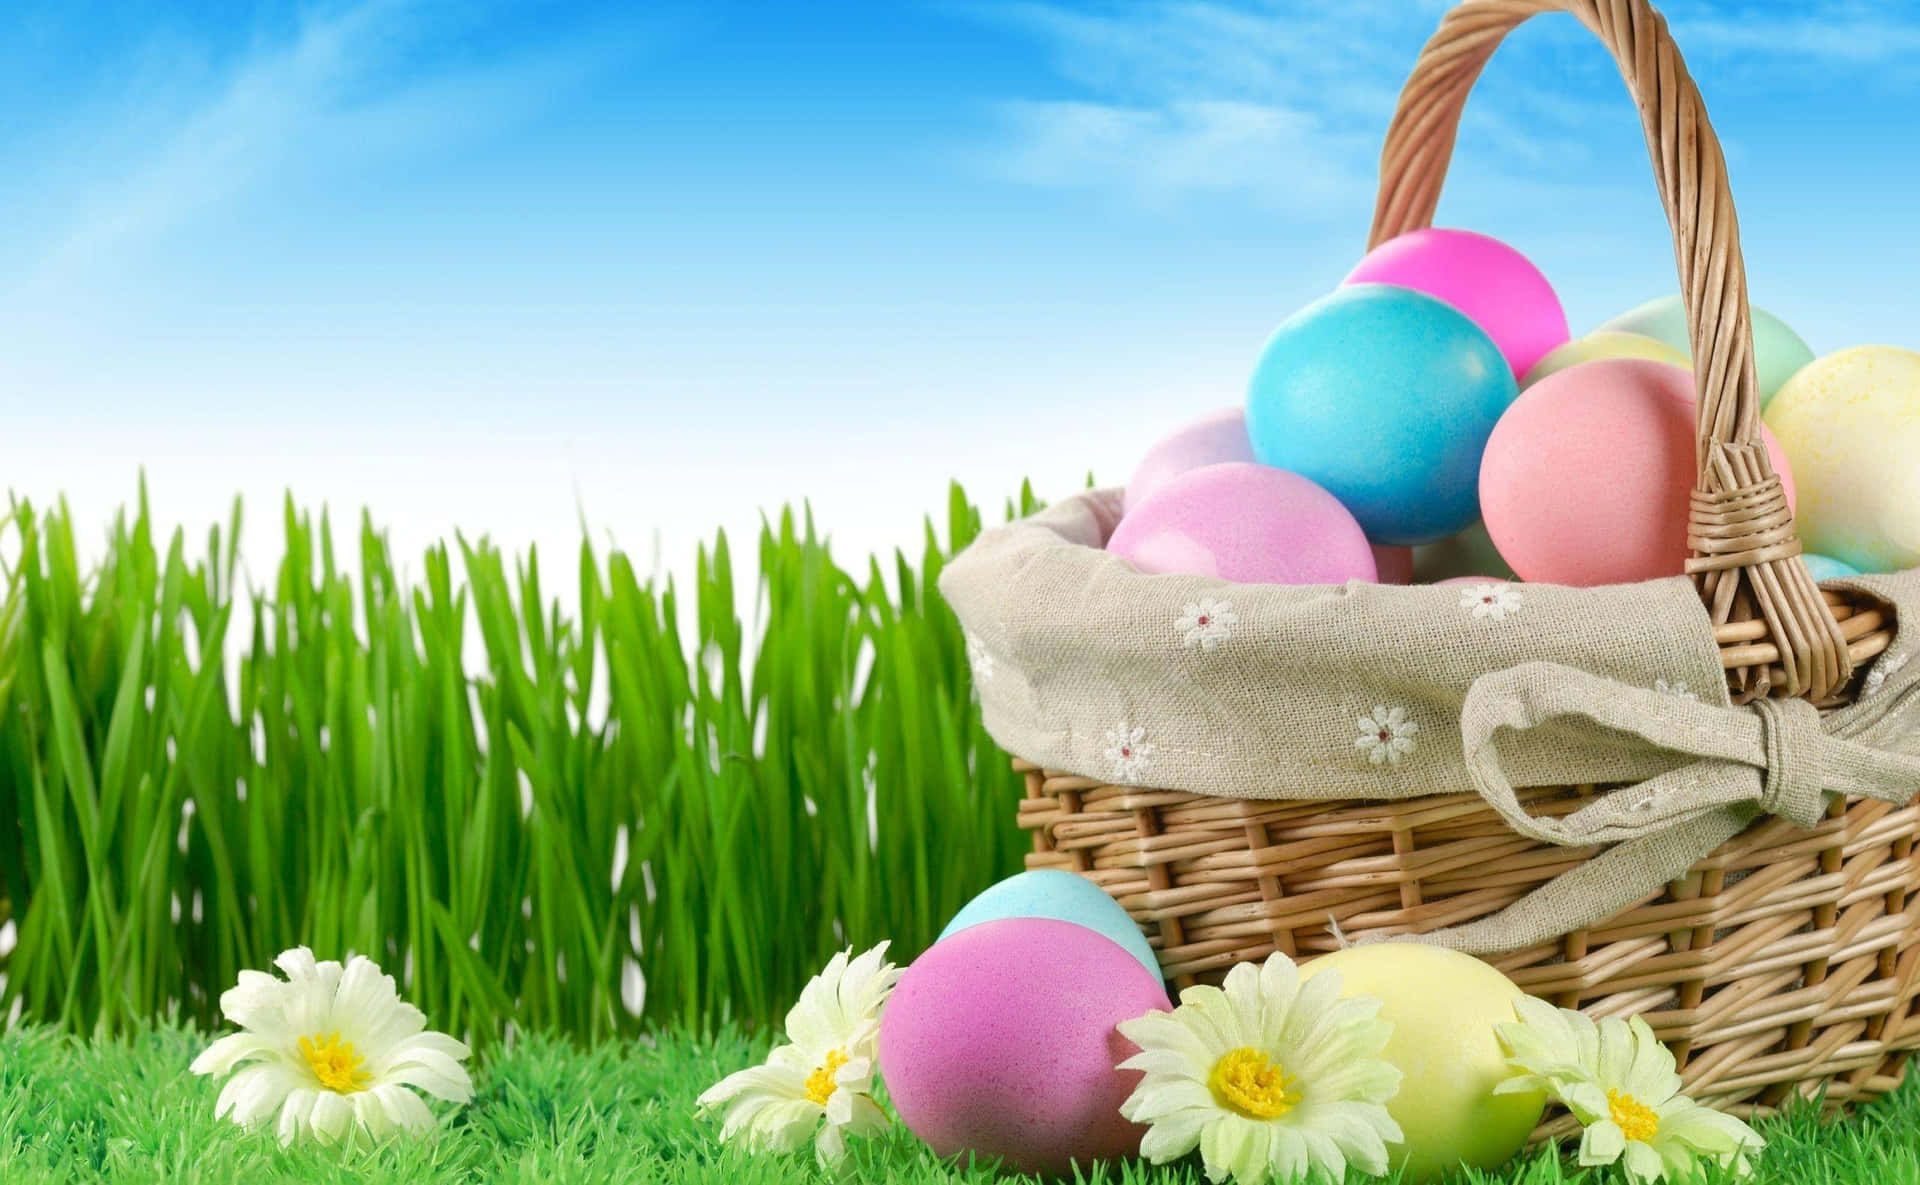 Celebrating Easter with a basket of Easter eggs